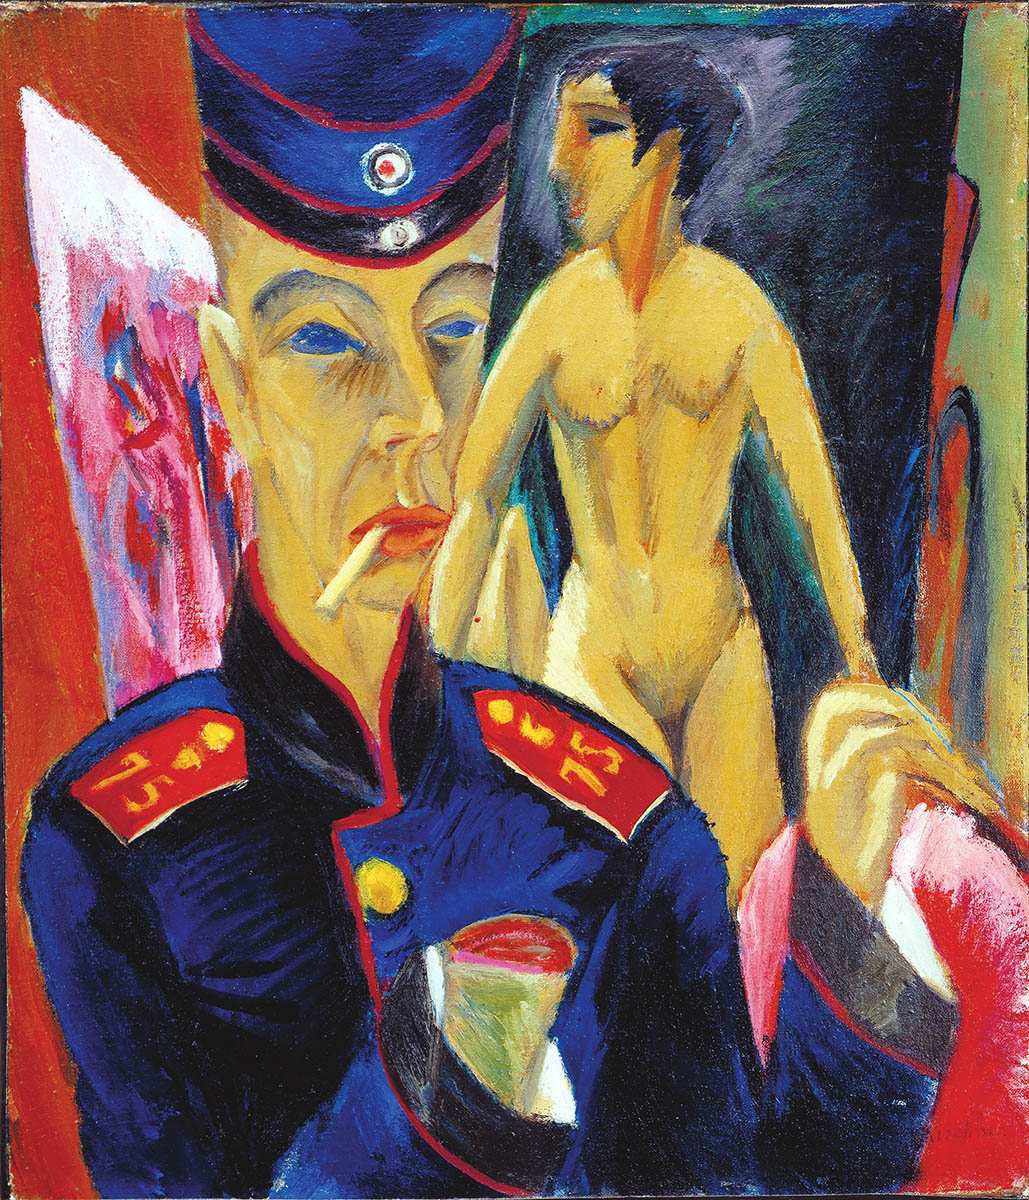 kirchner self portrait soldier painting